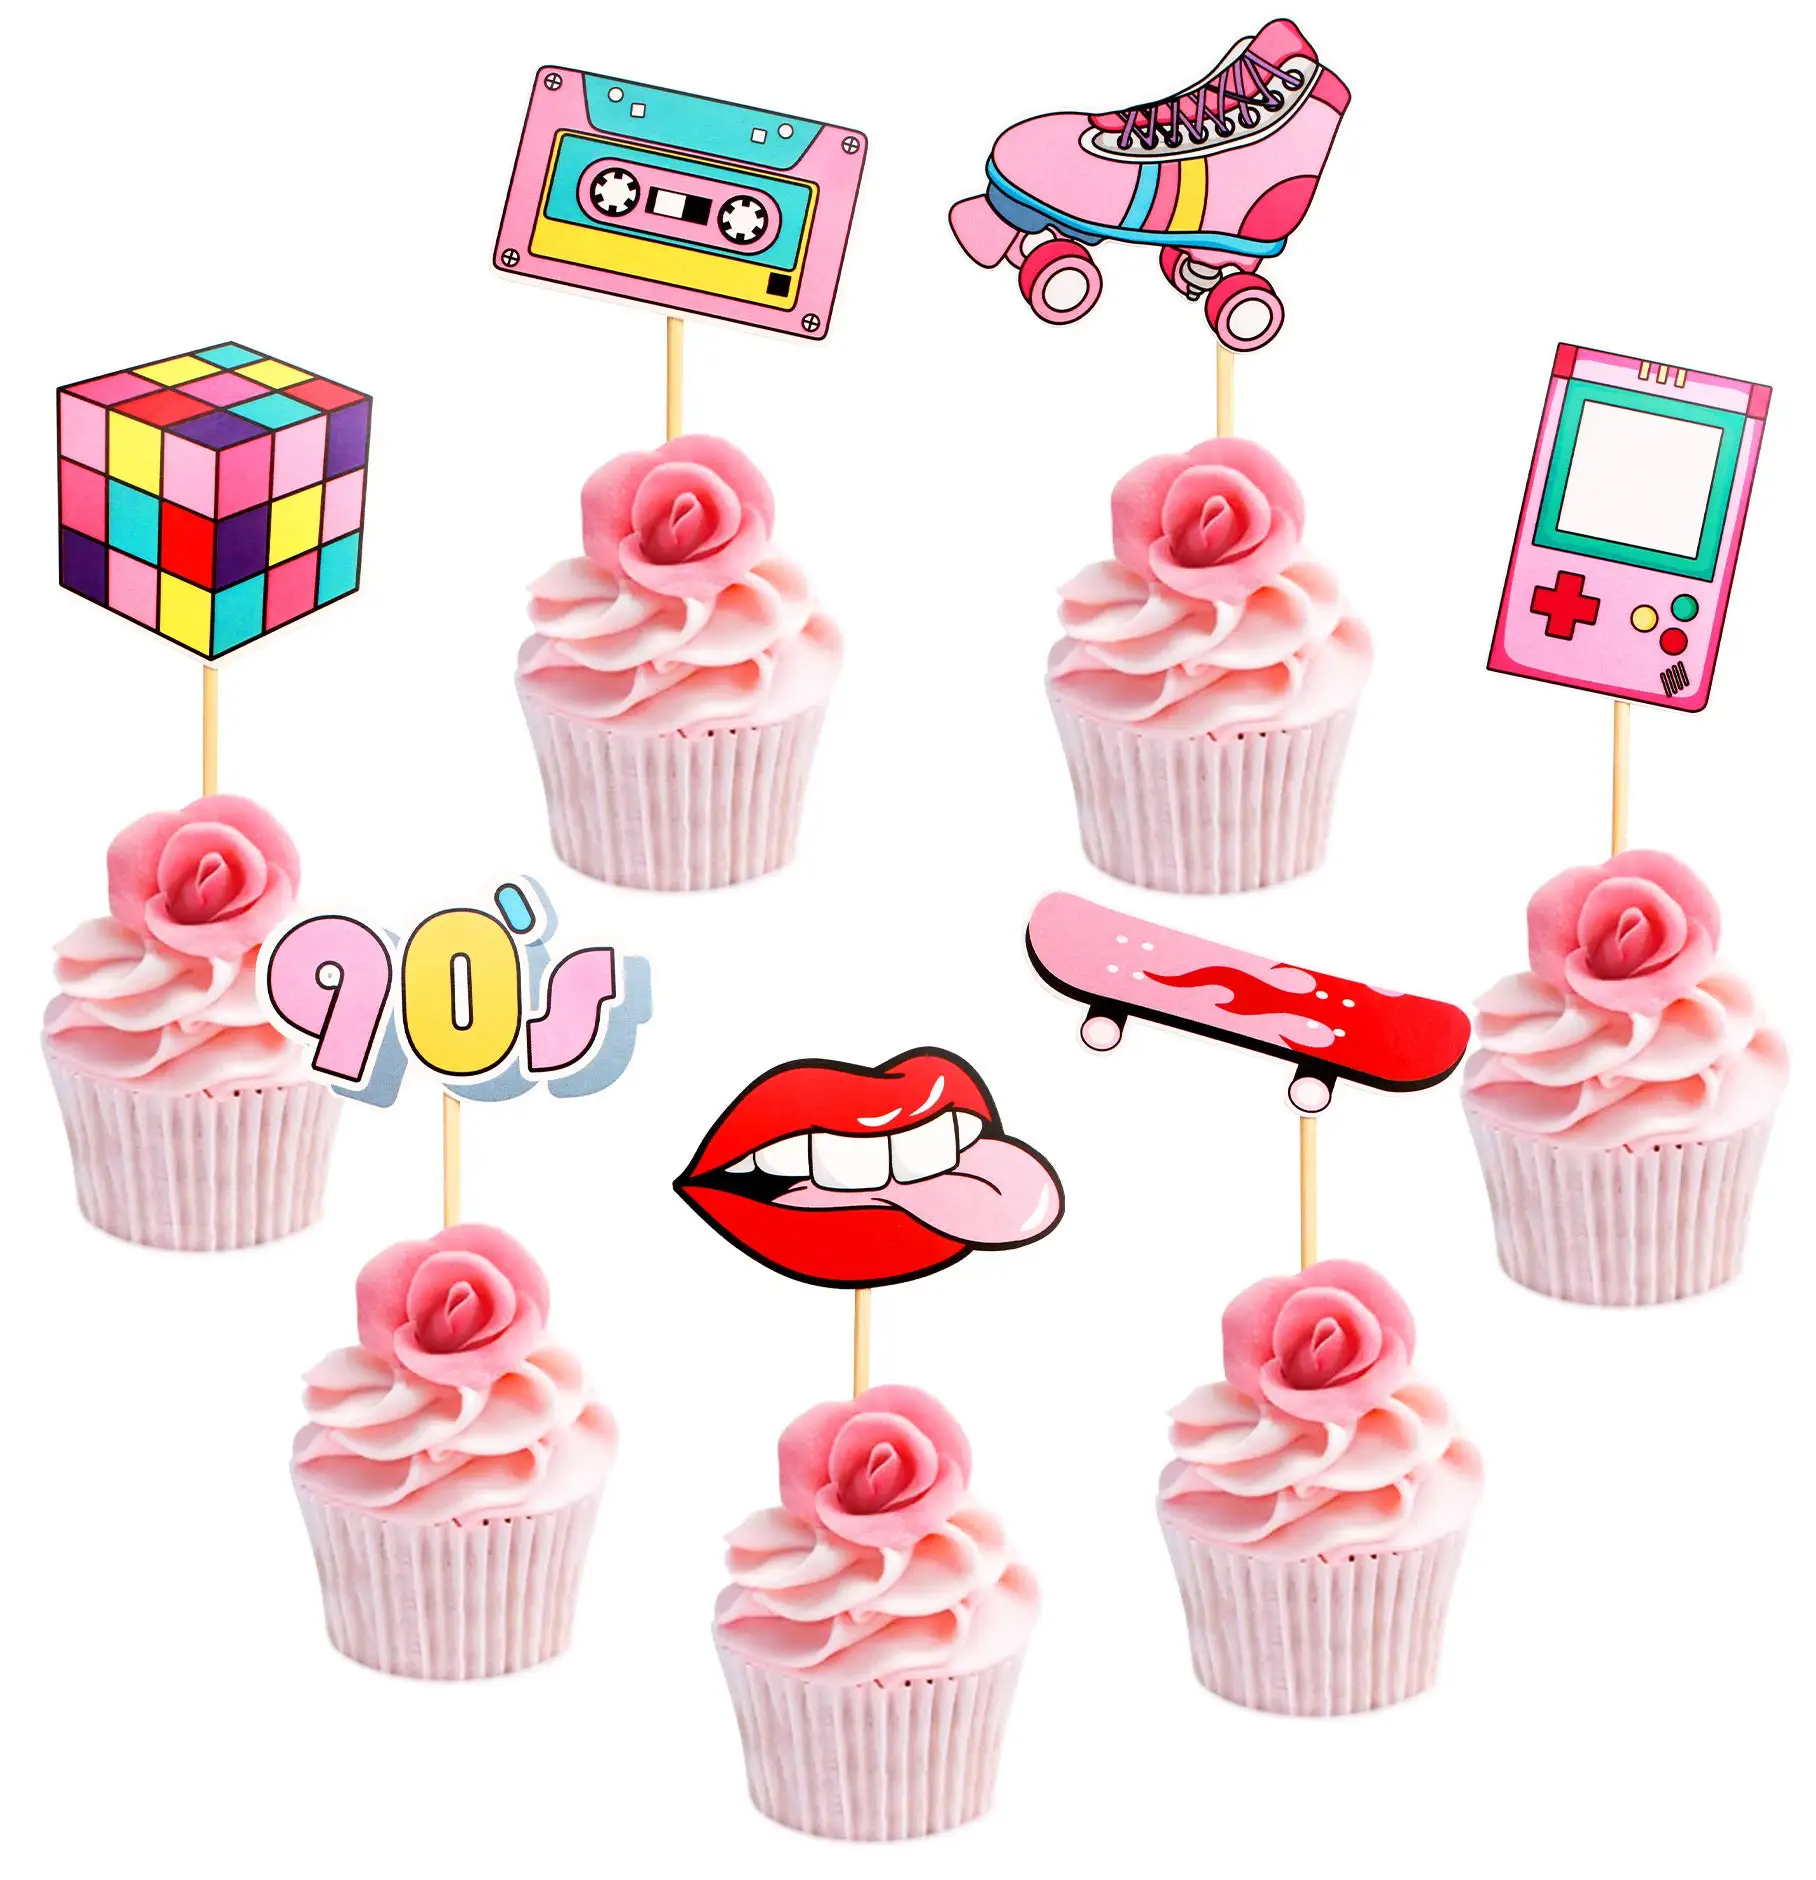 21Pcs 80s 90s Themed Cupcake Toppers Dessert Cupcake Toppers Birthday Supplies Throwback Party Favors Decorations